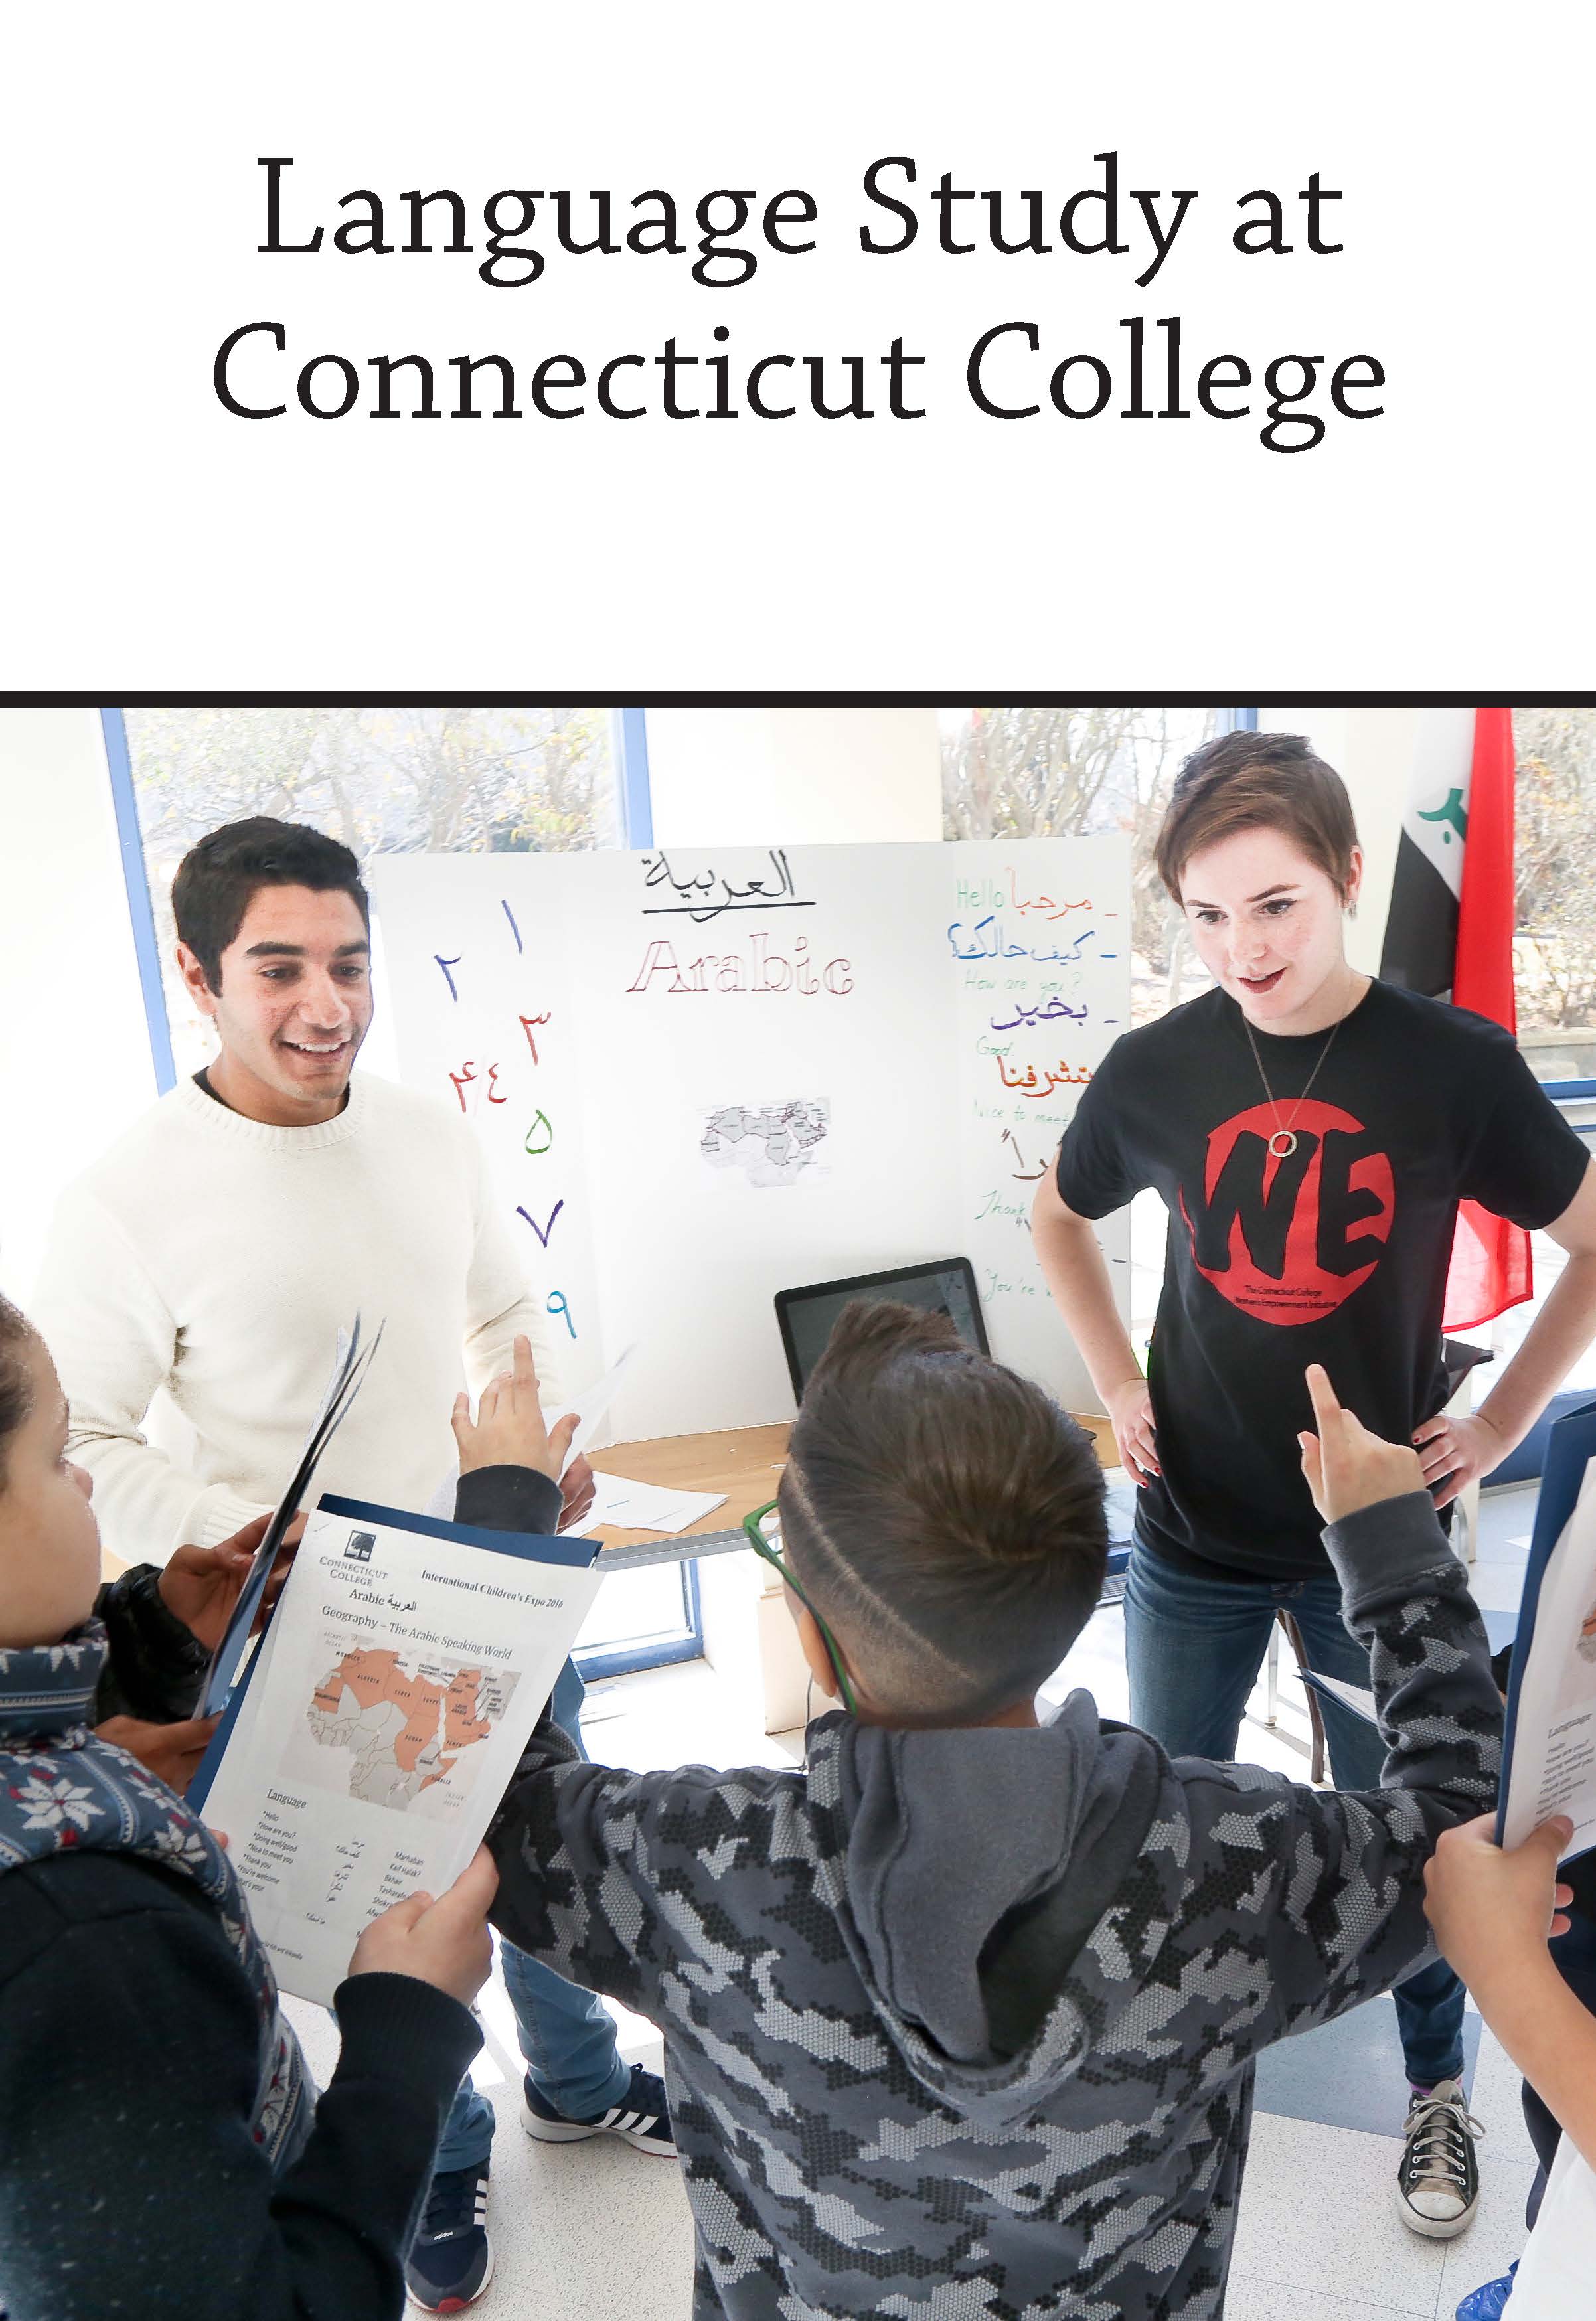 The cover of a brochure that explains language study at Conn